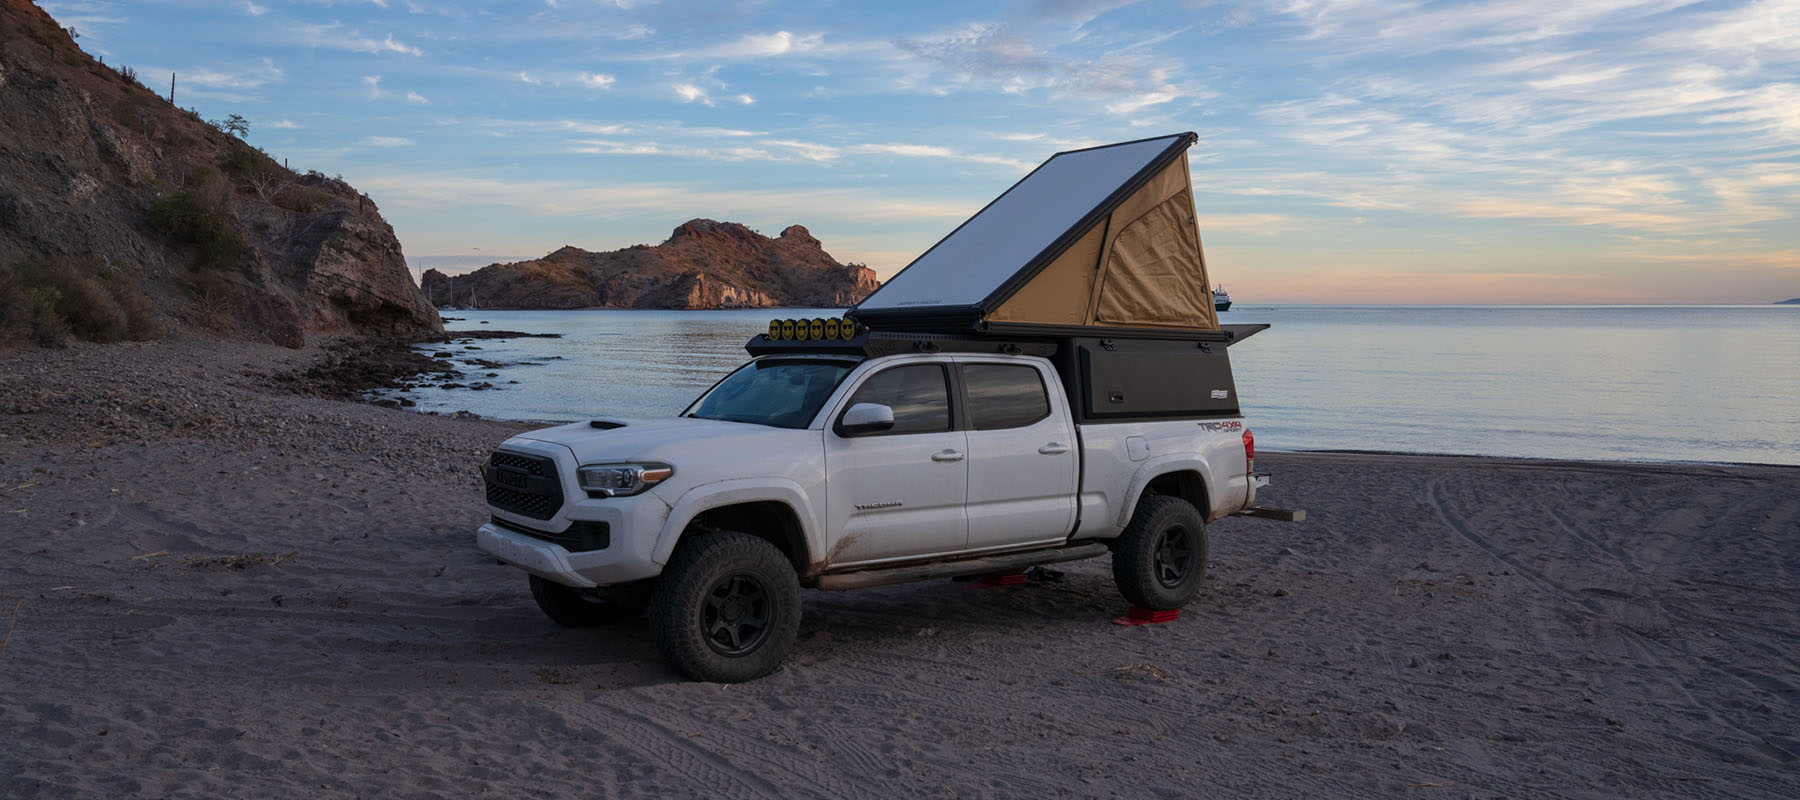 Rigs We Dig: Toyota Tacoma with Super Pacific X1